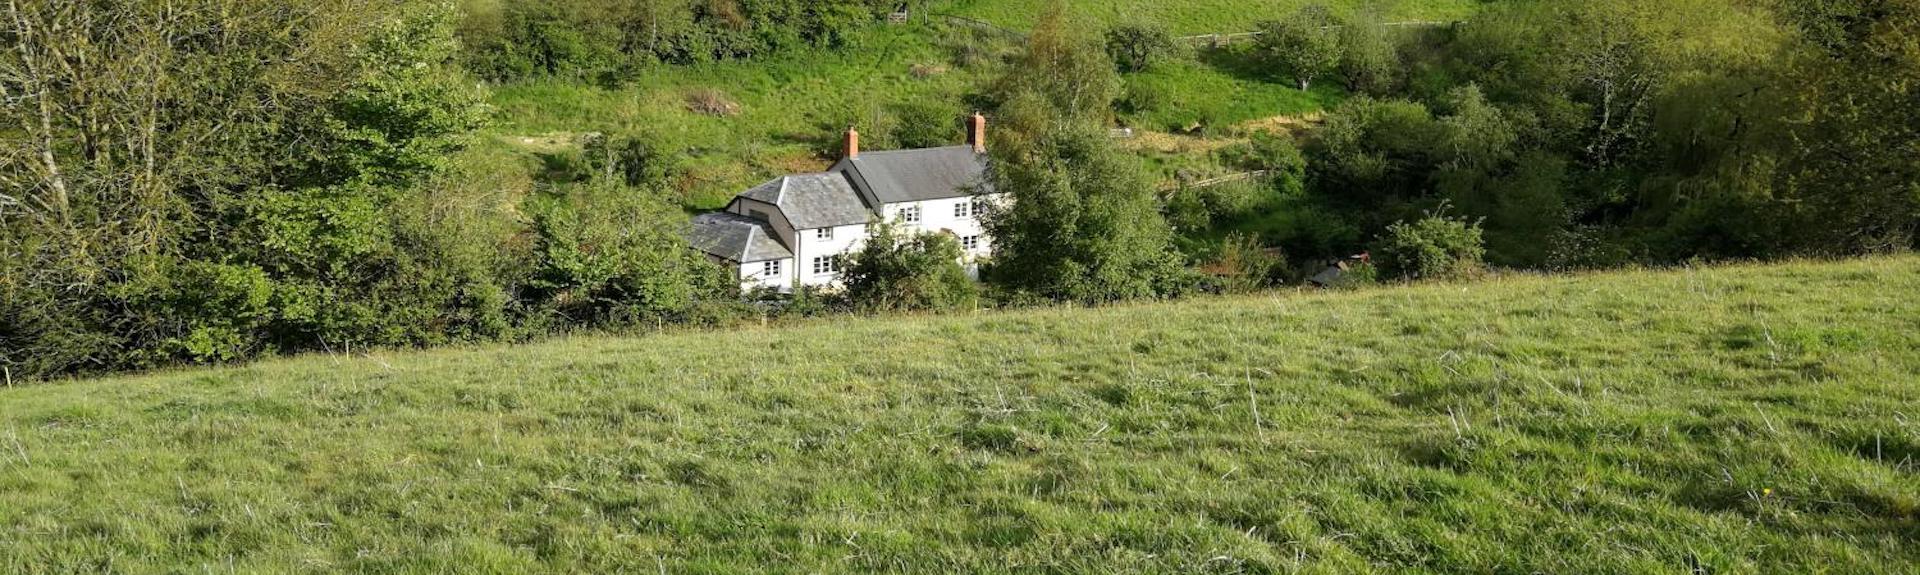 A rural location in high summer, with fields, hedgerows and a white-painted cottage in the middle distance.